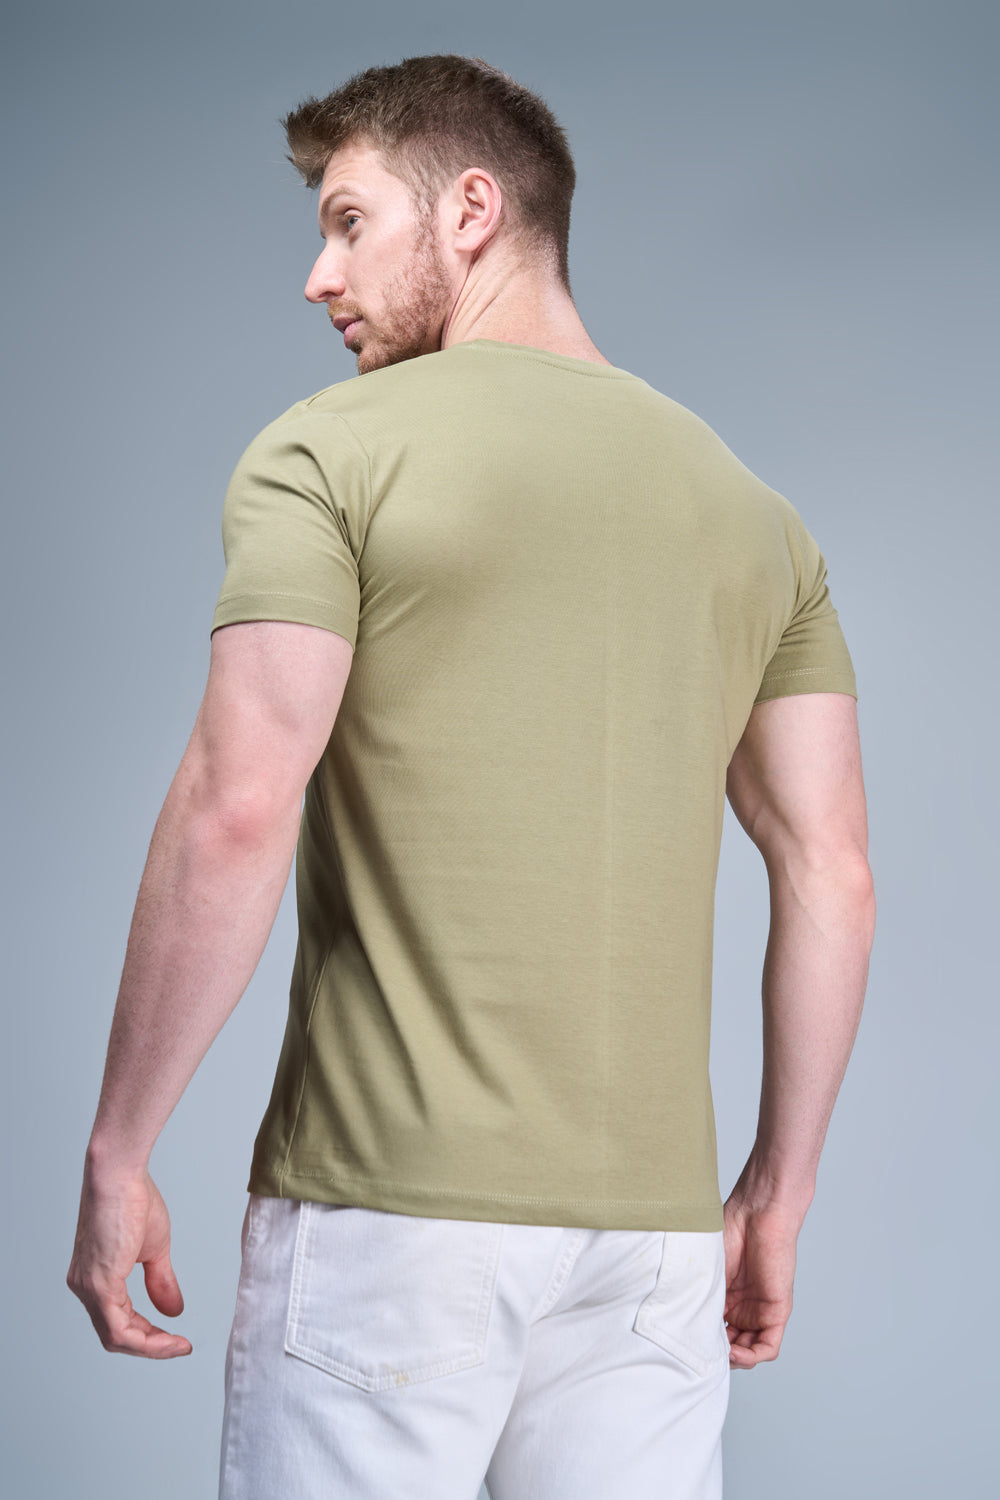 Forest green colored, cotton Graphic T shirt for men, half sleeves and round neck, Back view.